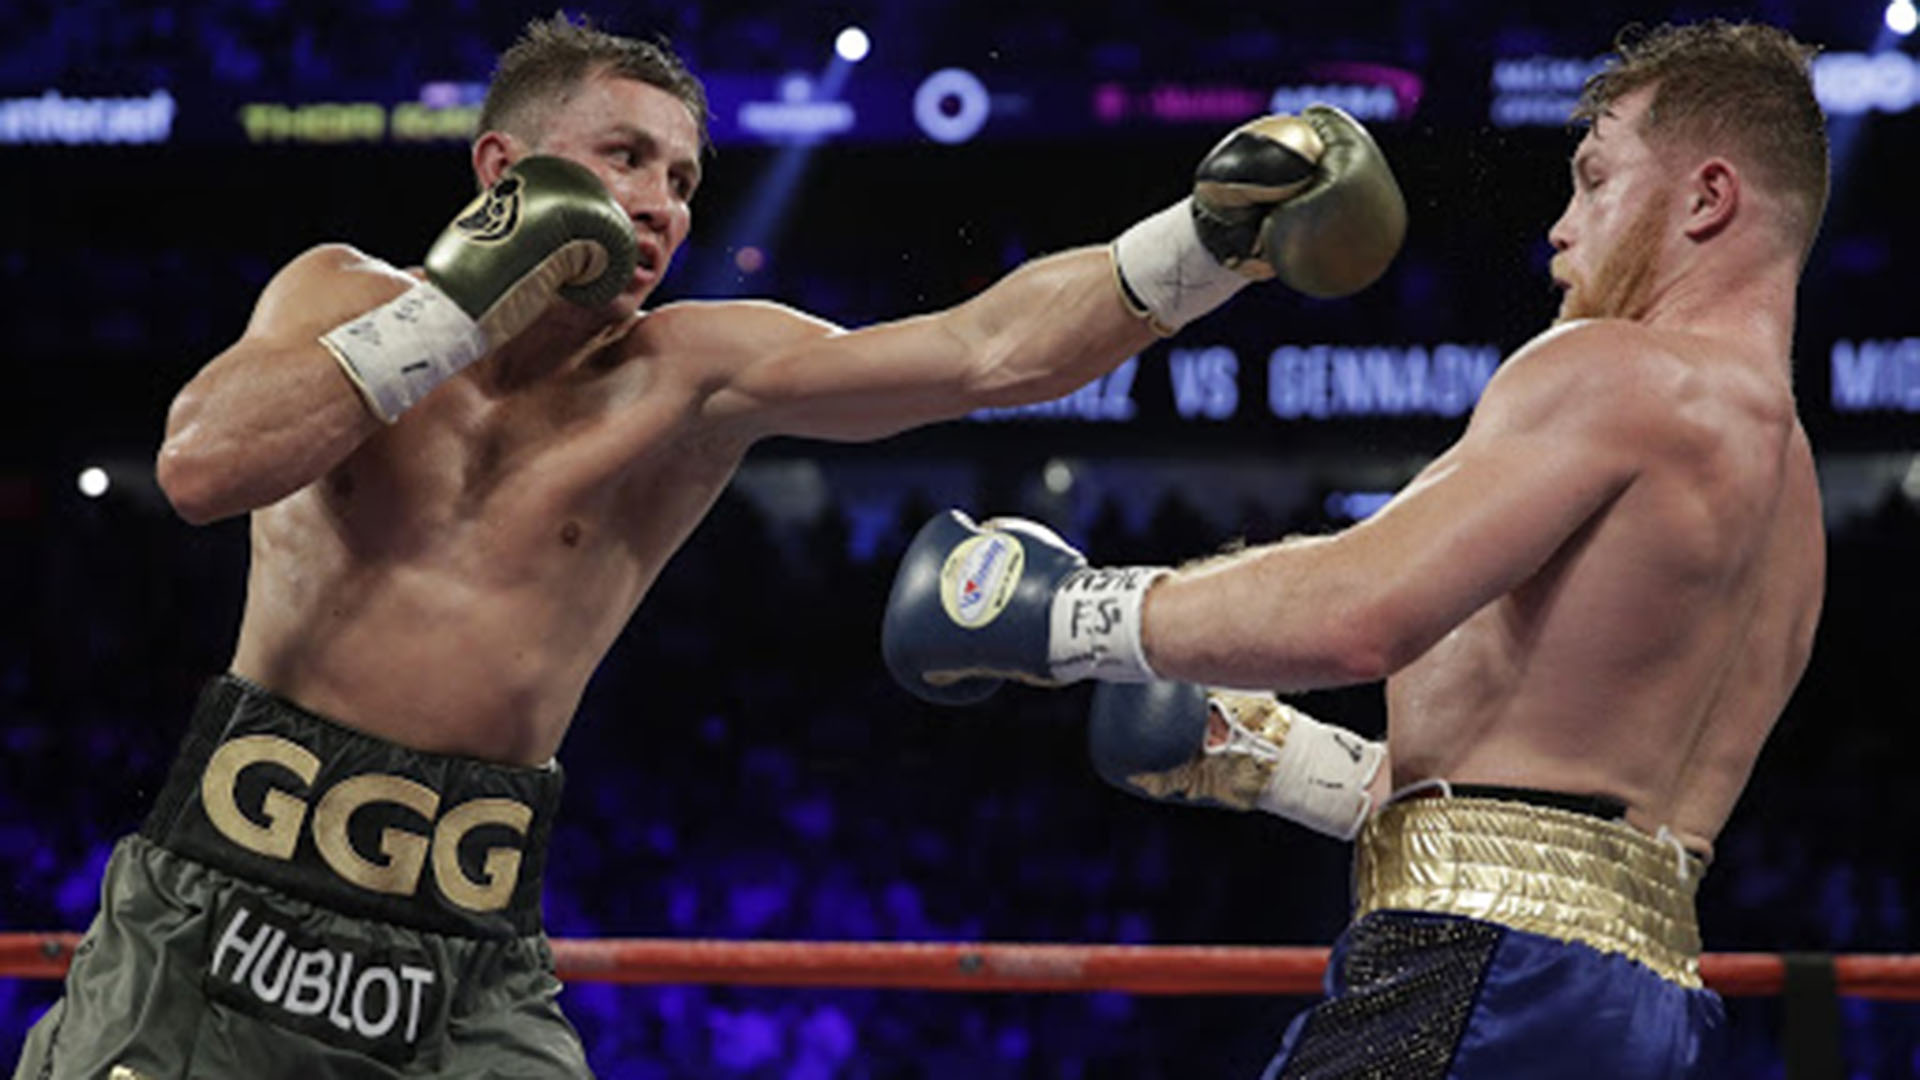 Canelo Álvarez won the second fight by split decision after the tie in the first fight (PHOTO: AP/John Locher)